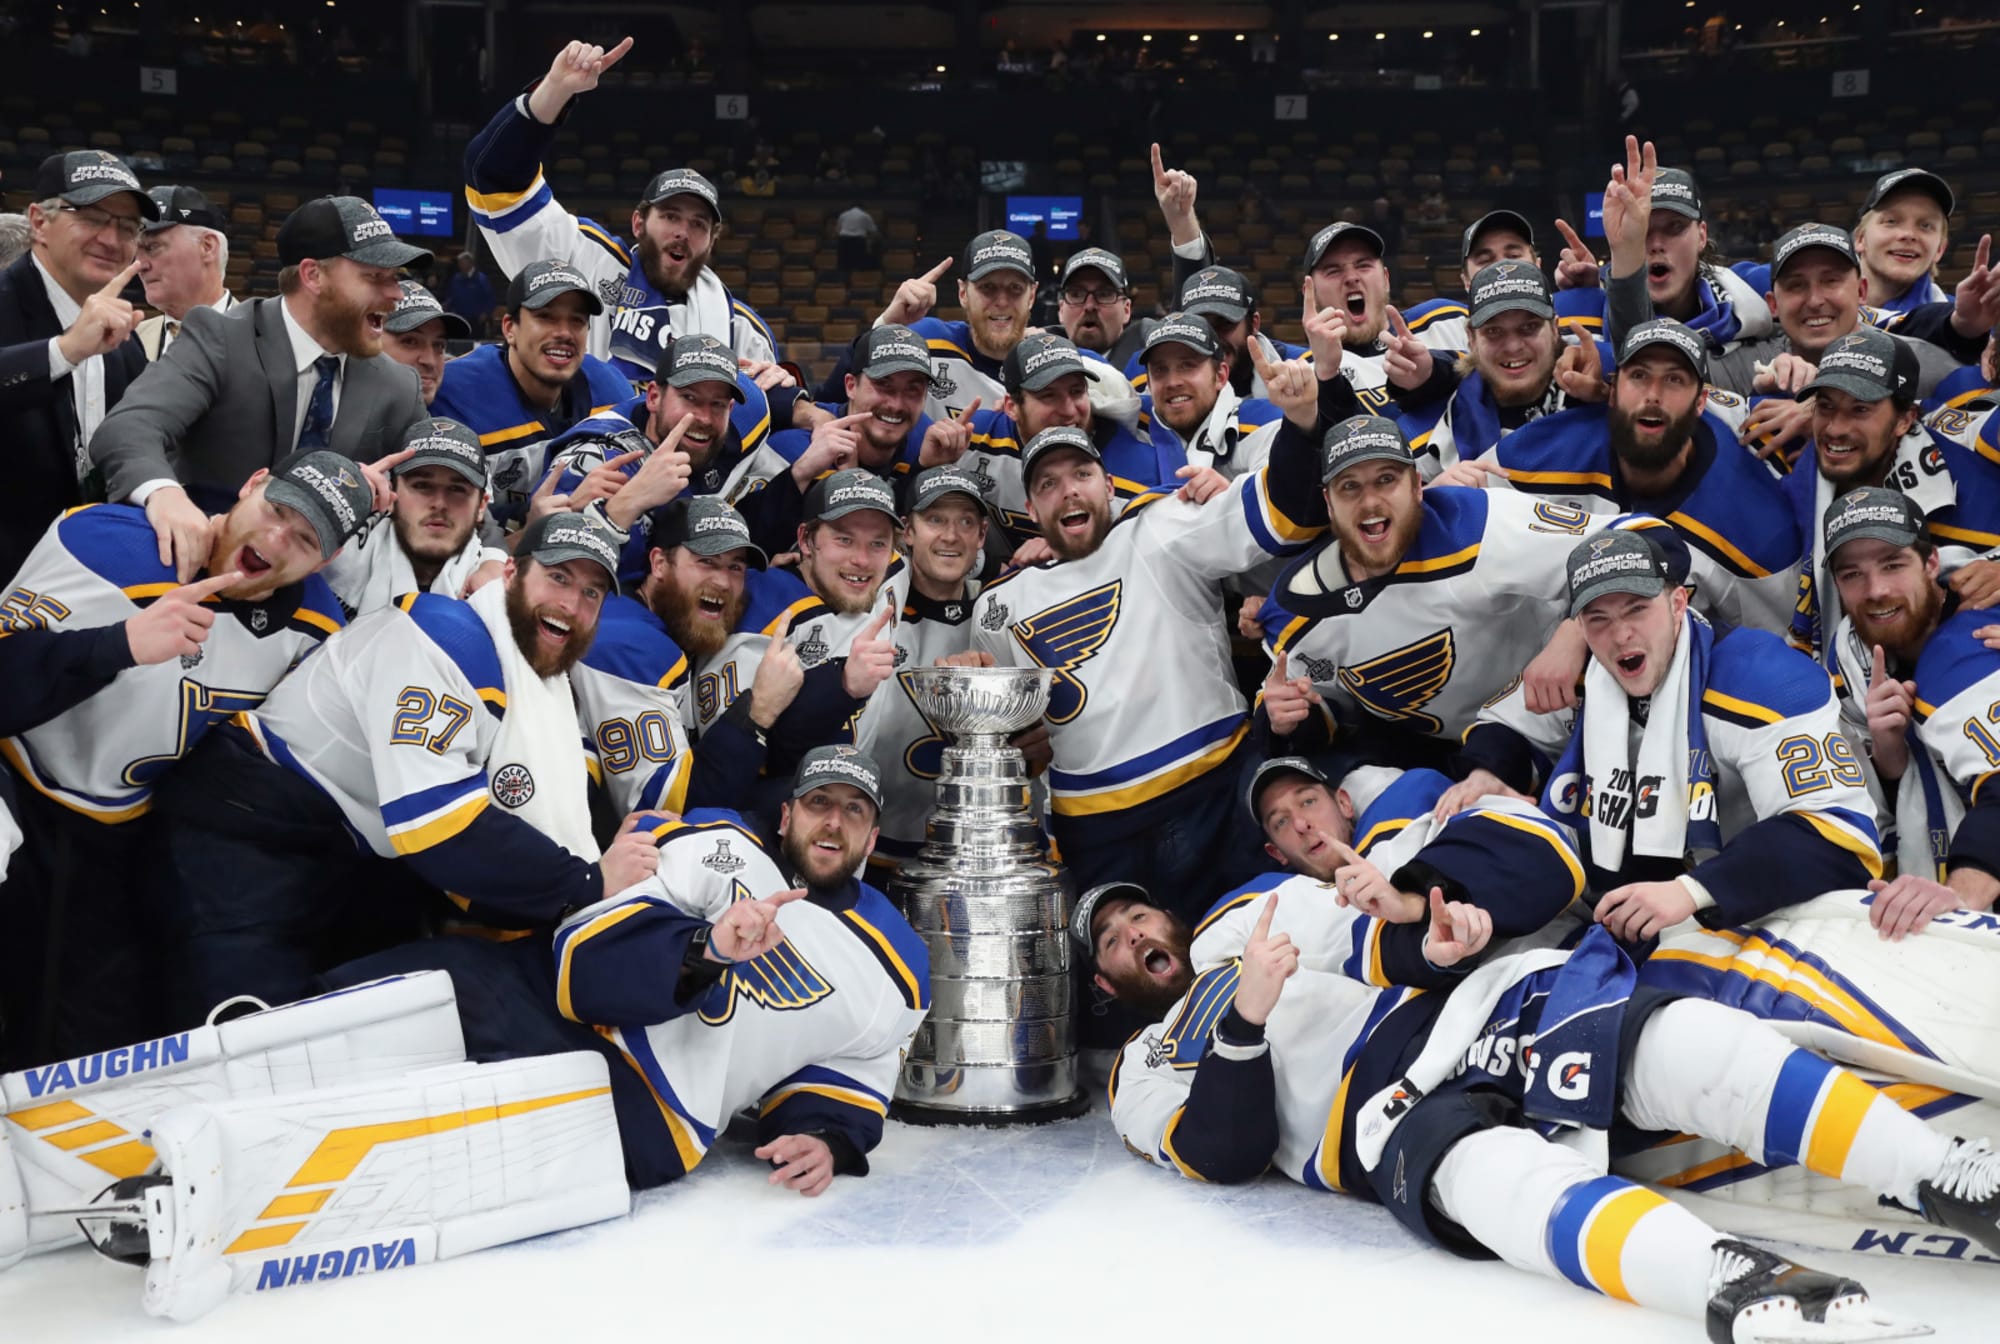 Listen in to the final moments of the Blues winning the Stanley Cup 